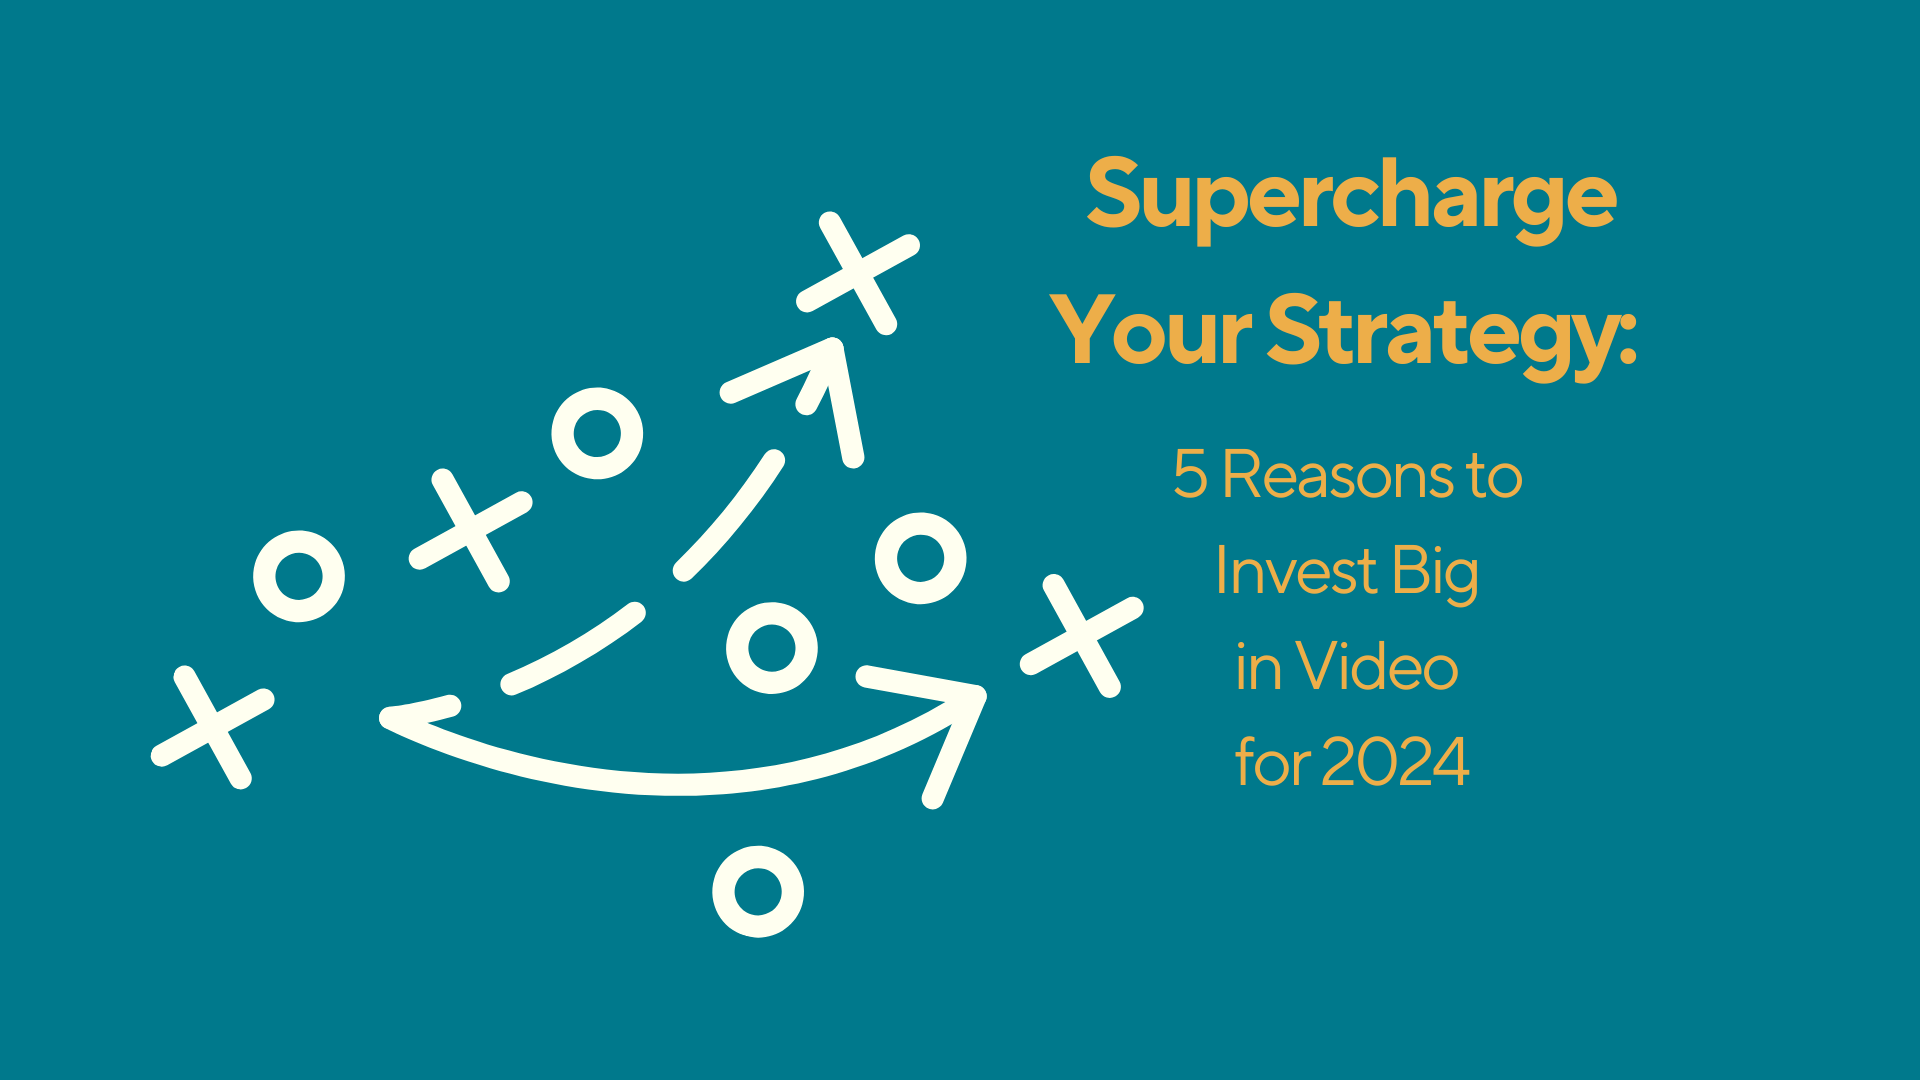 Why Invest Big in Video for 2024